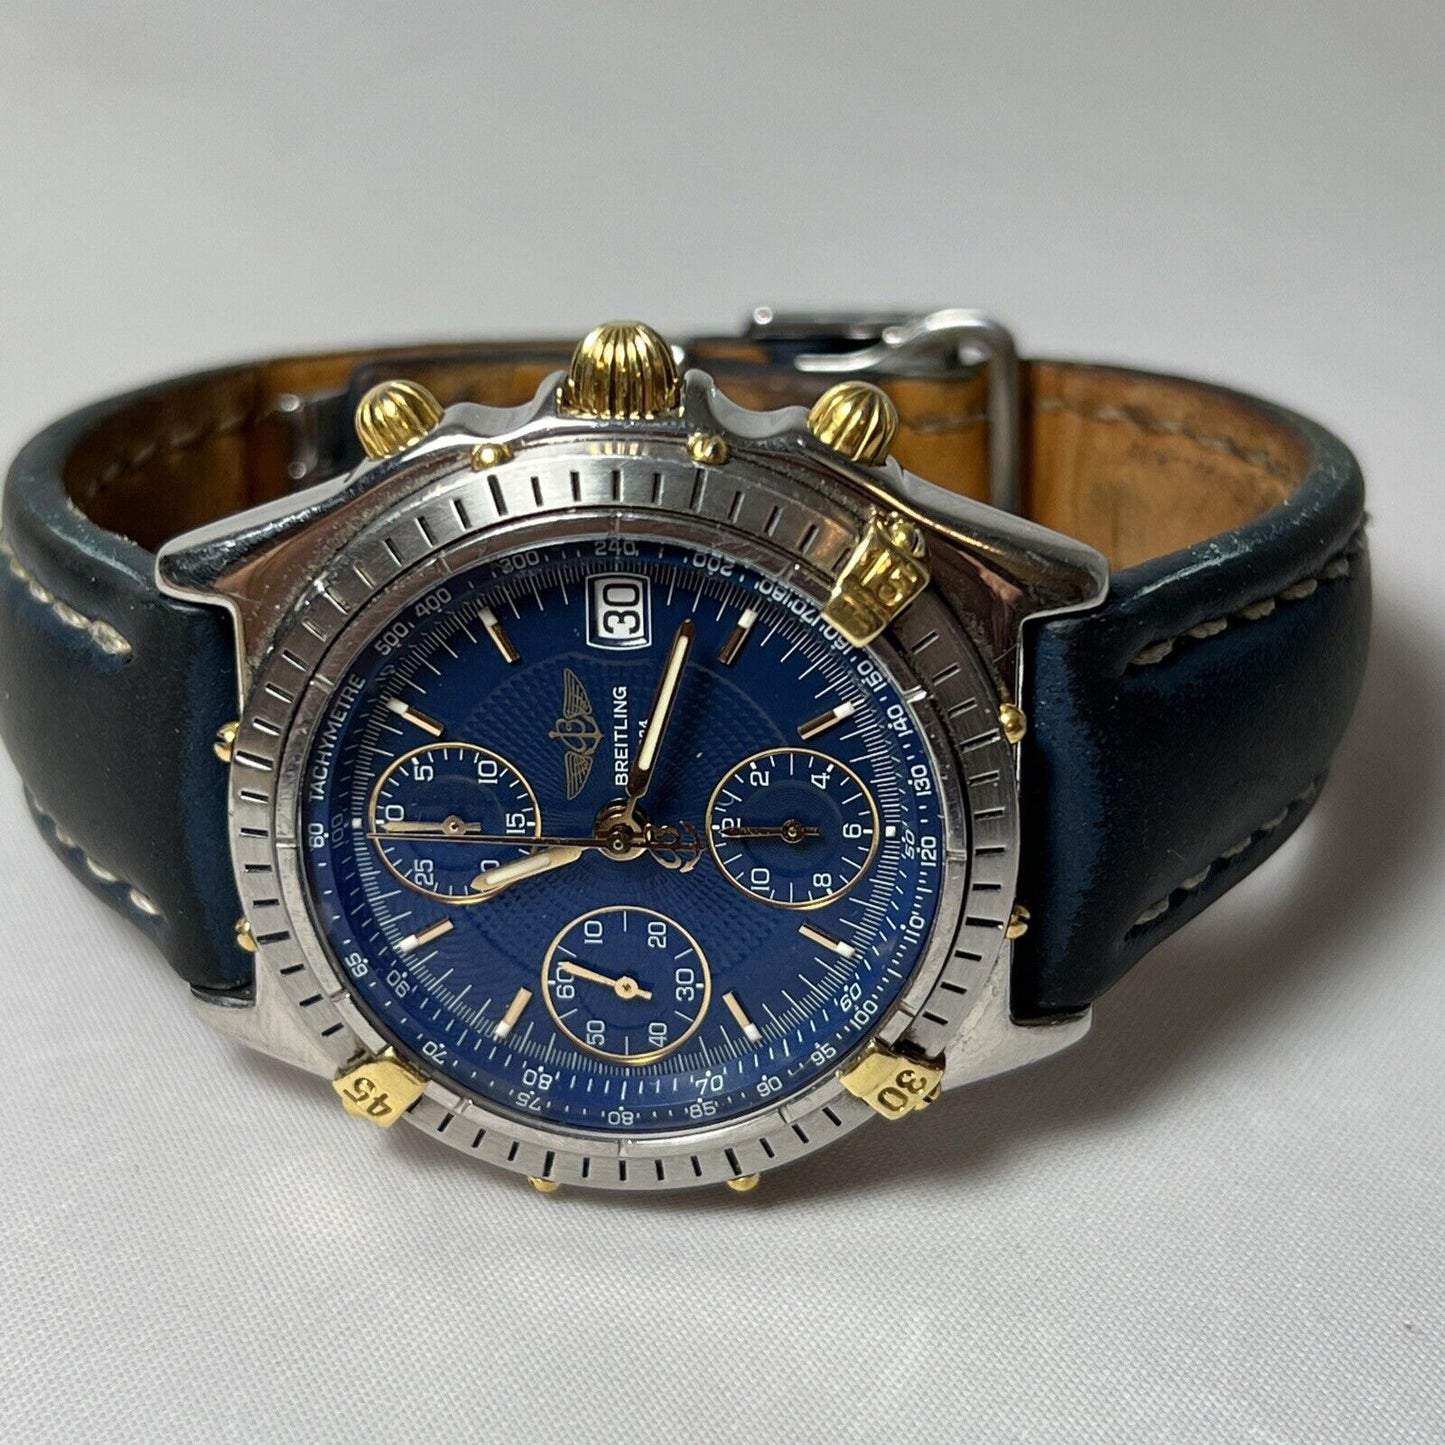 Two-Tone Blue Dial Breitling 39mm 81950 Chronograph Automatic Date Watch - READ